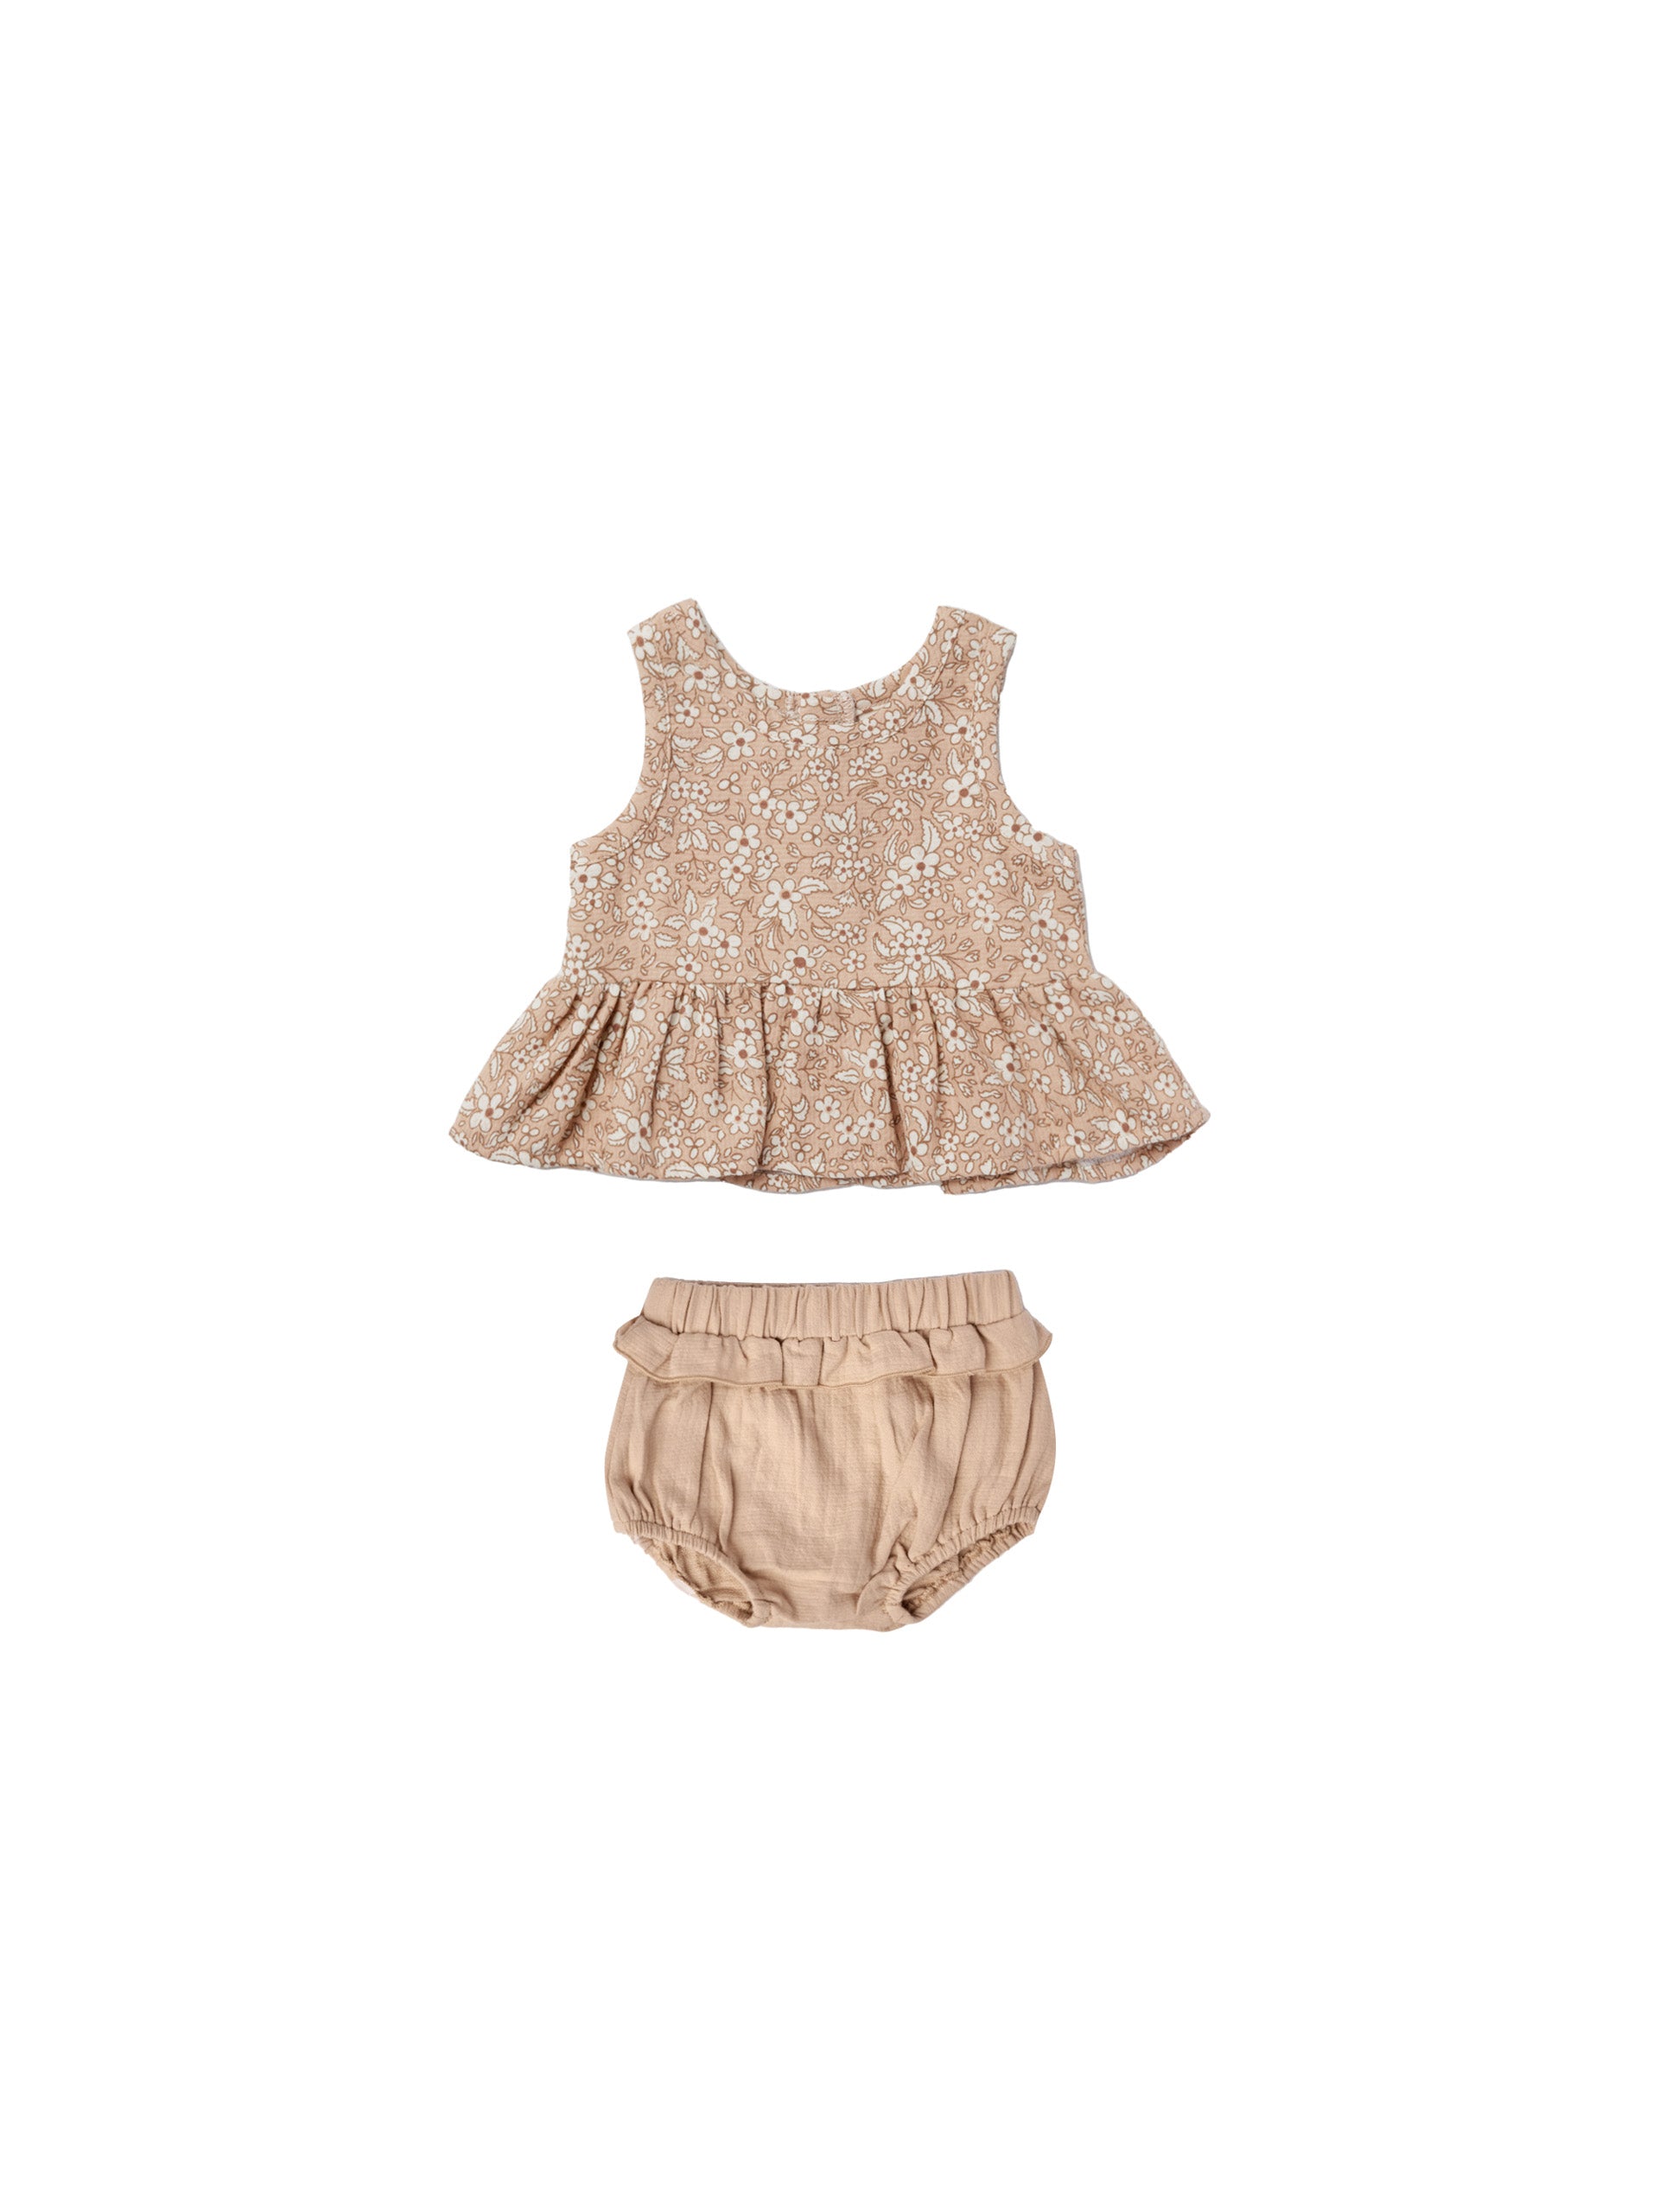 baby girl peplum set in apricot floral print